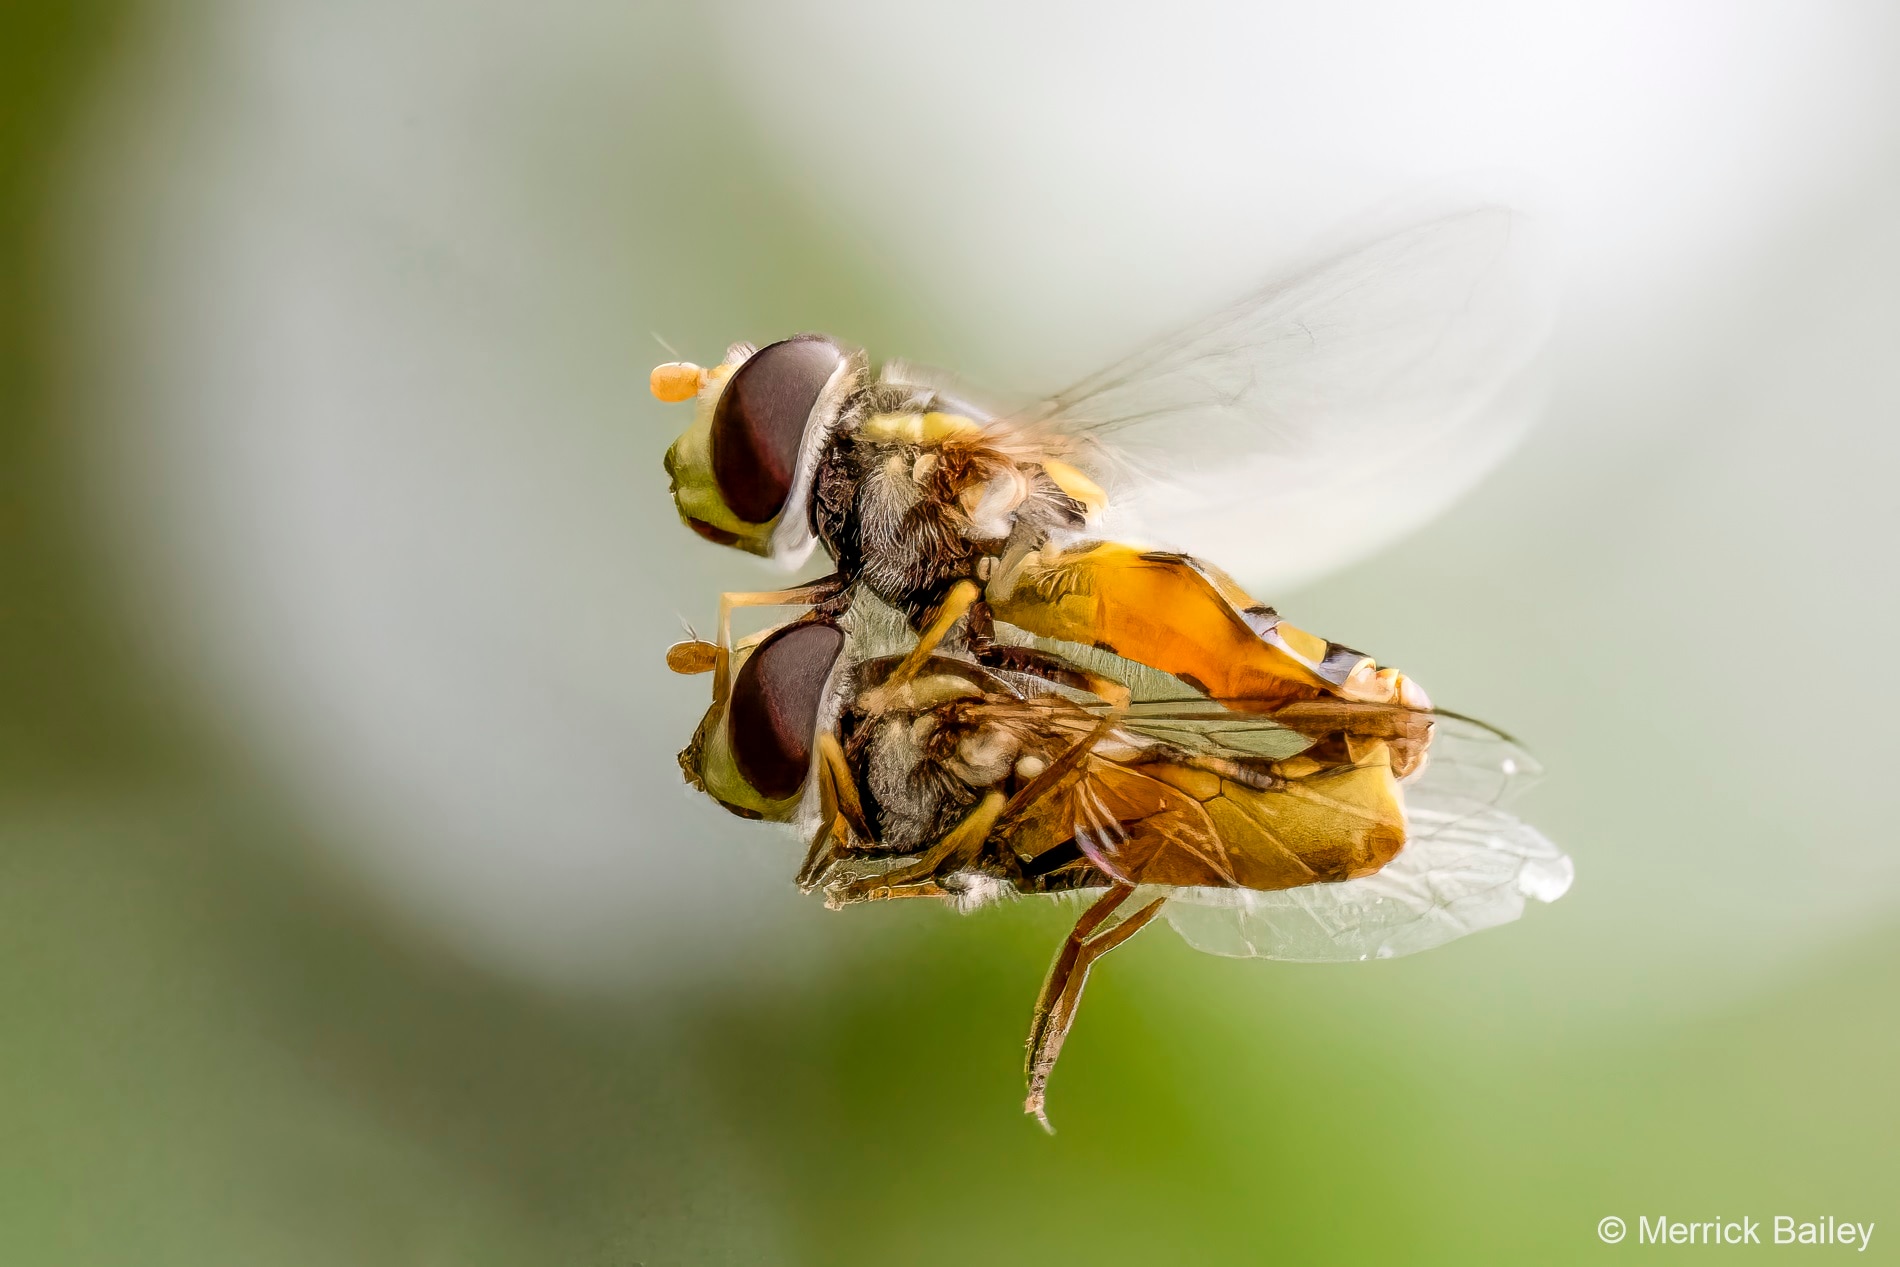 A close up of two flies mating in mid air